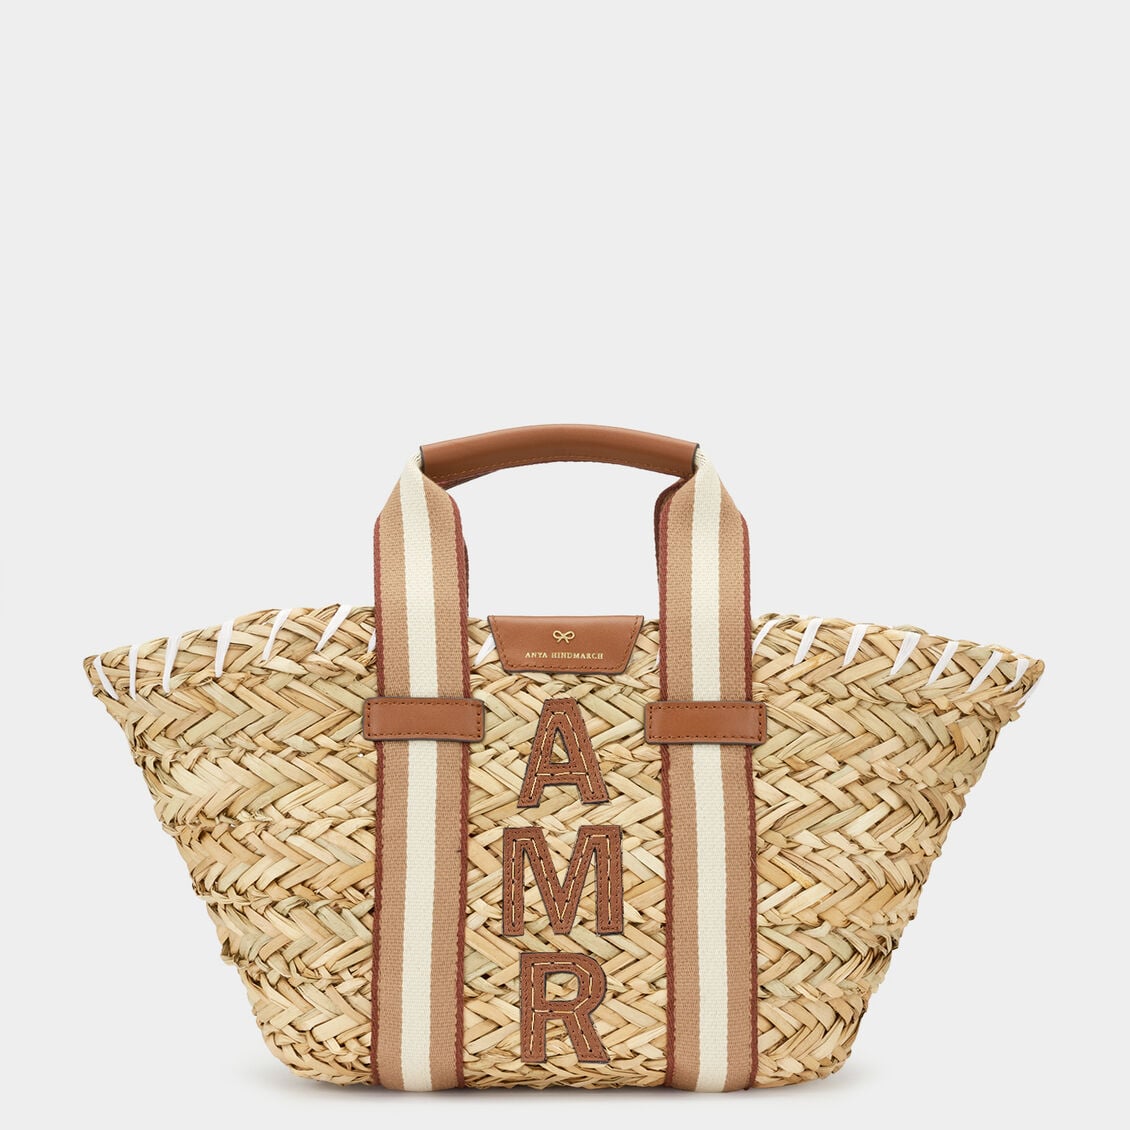 All About the Bags: 9 Monogrammed Bags You Need - Blog